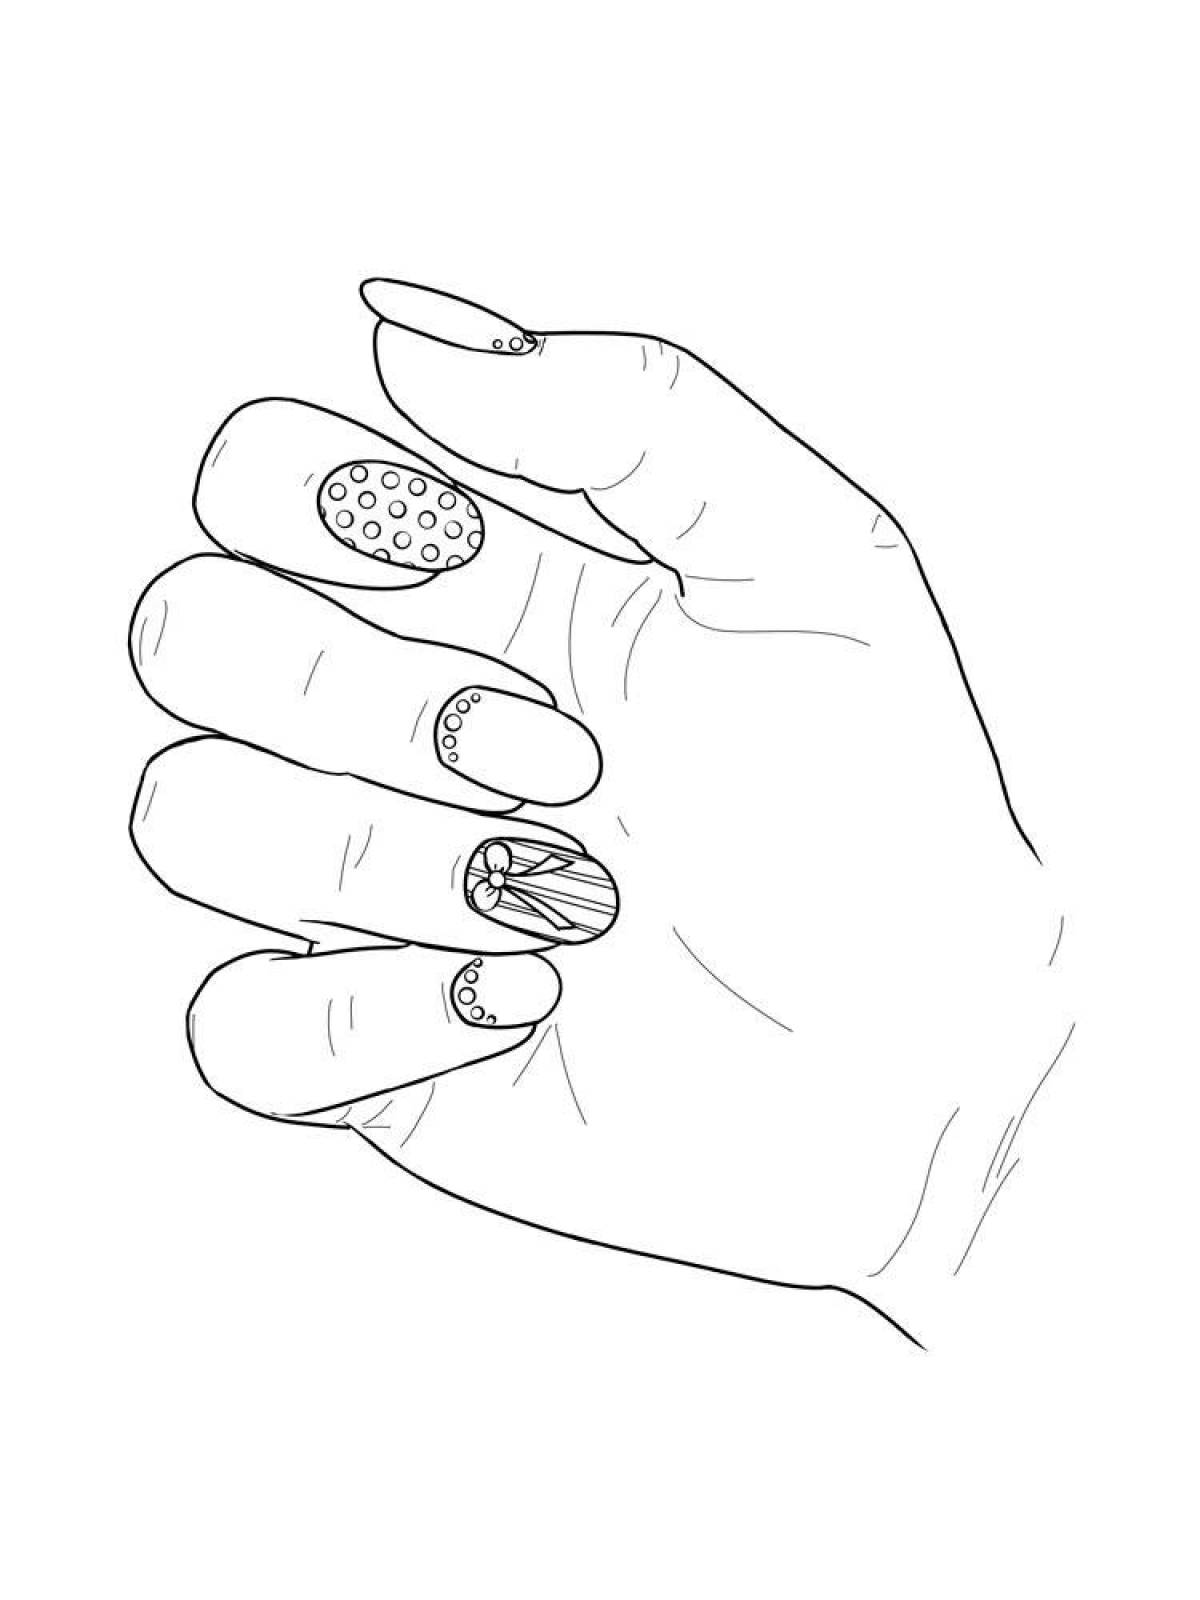 Playful manicure coloring page